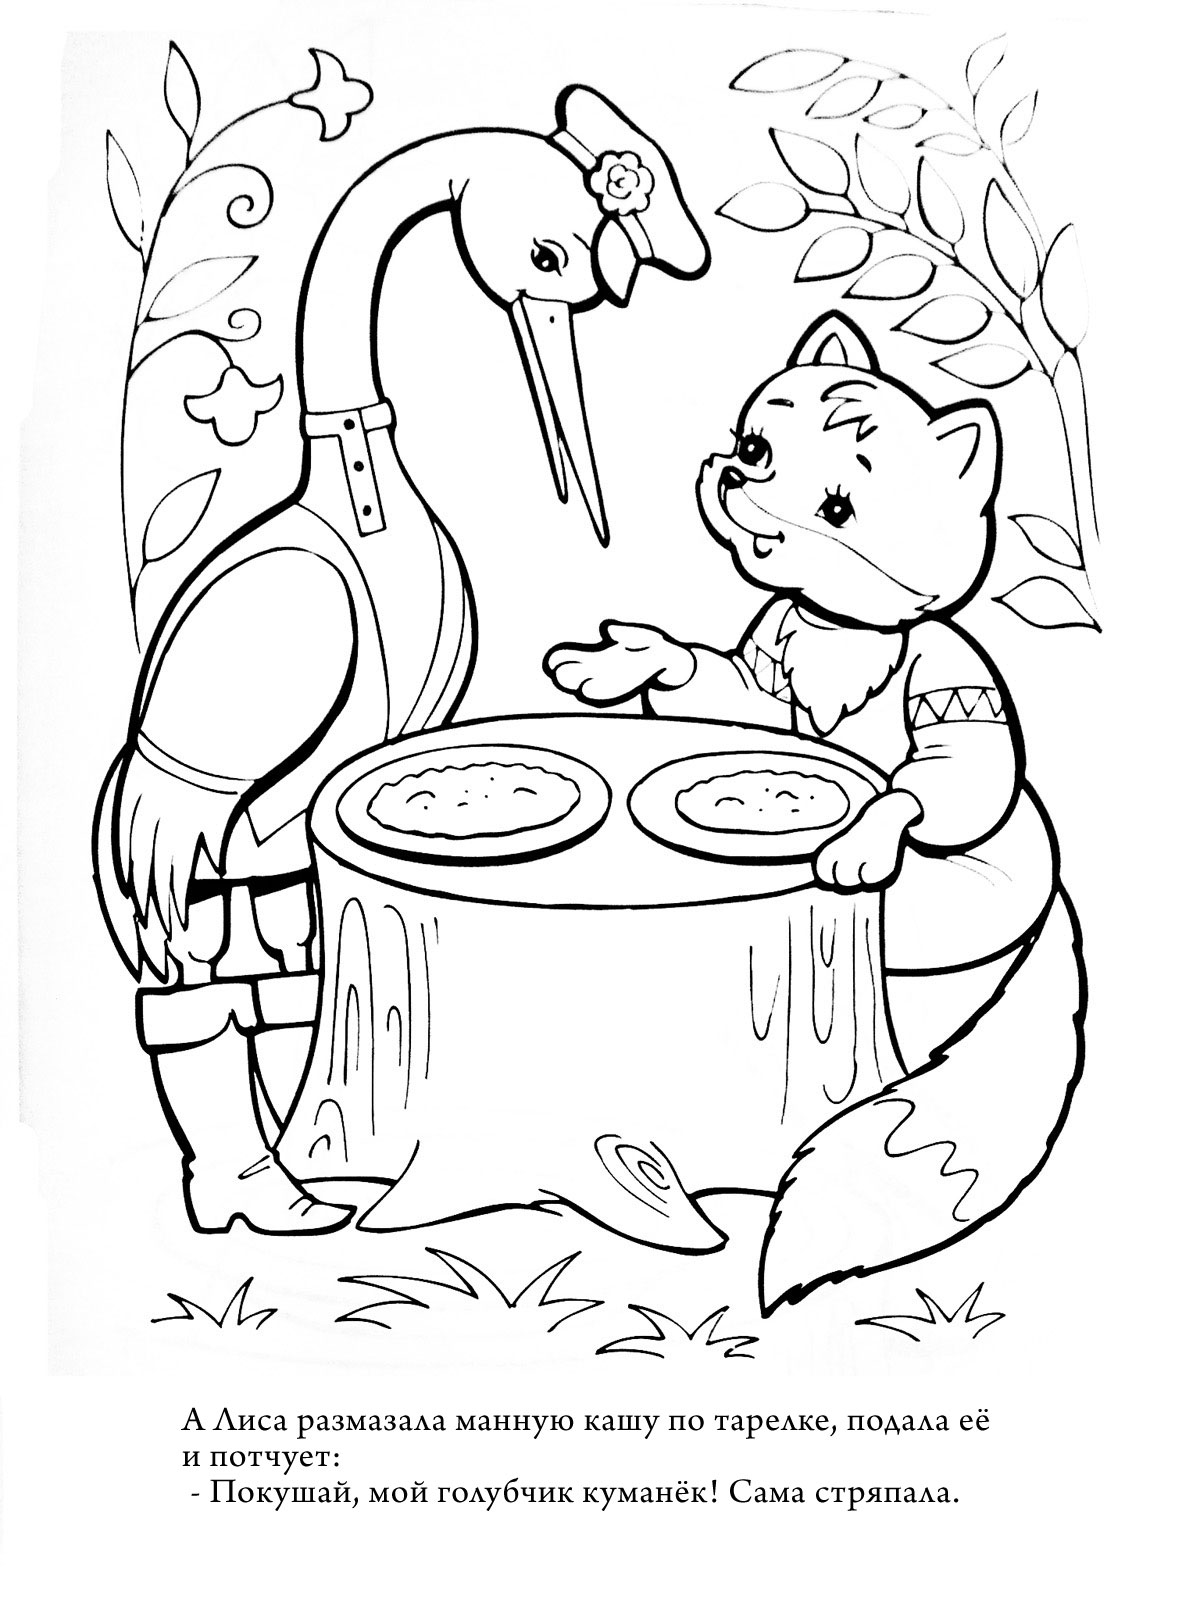 Photo From fairy tales, Fox and crane #1